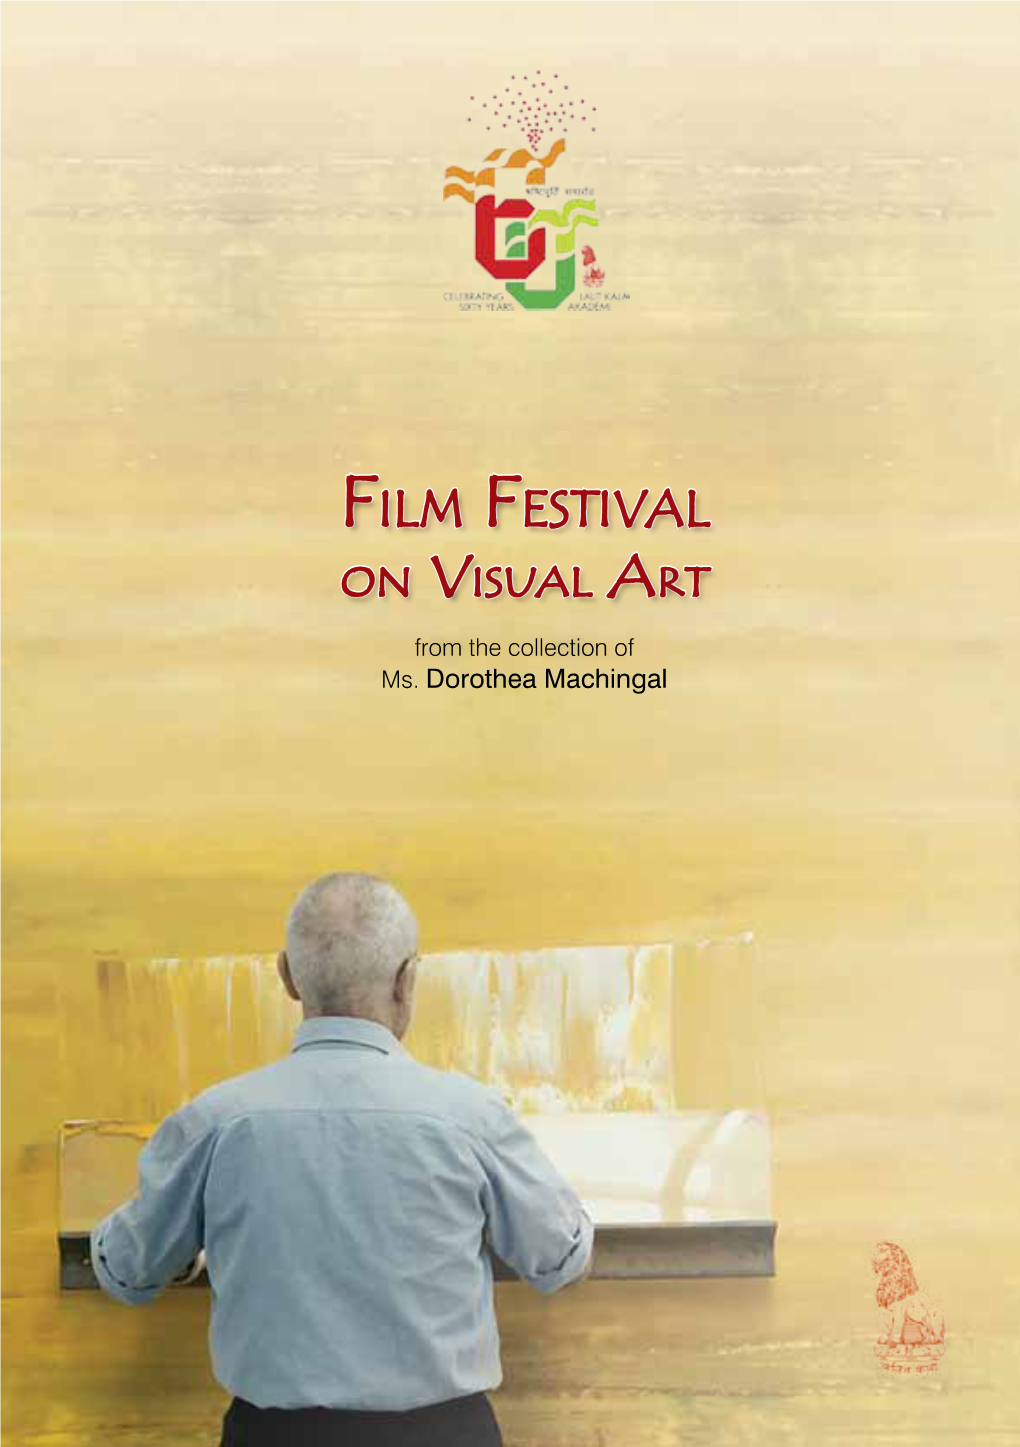 Film Festival on Visual Art from the Collection of Ms